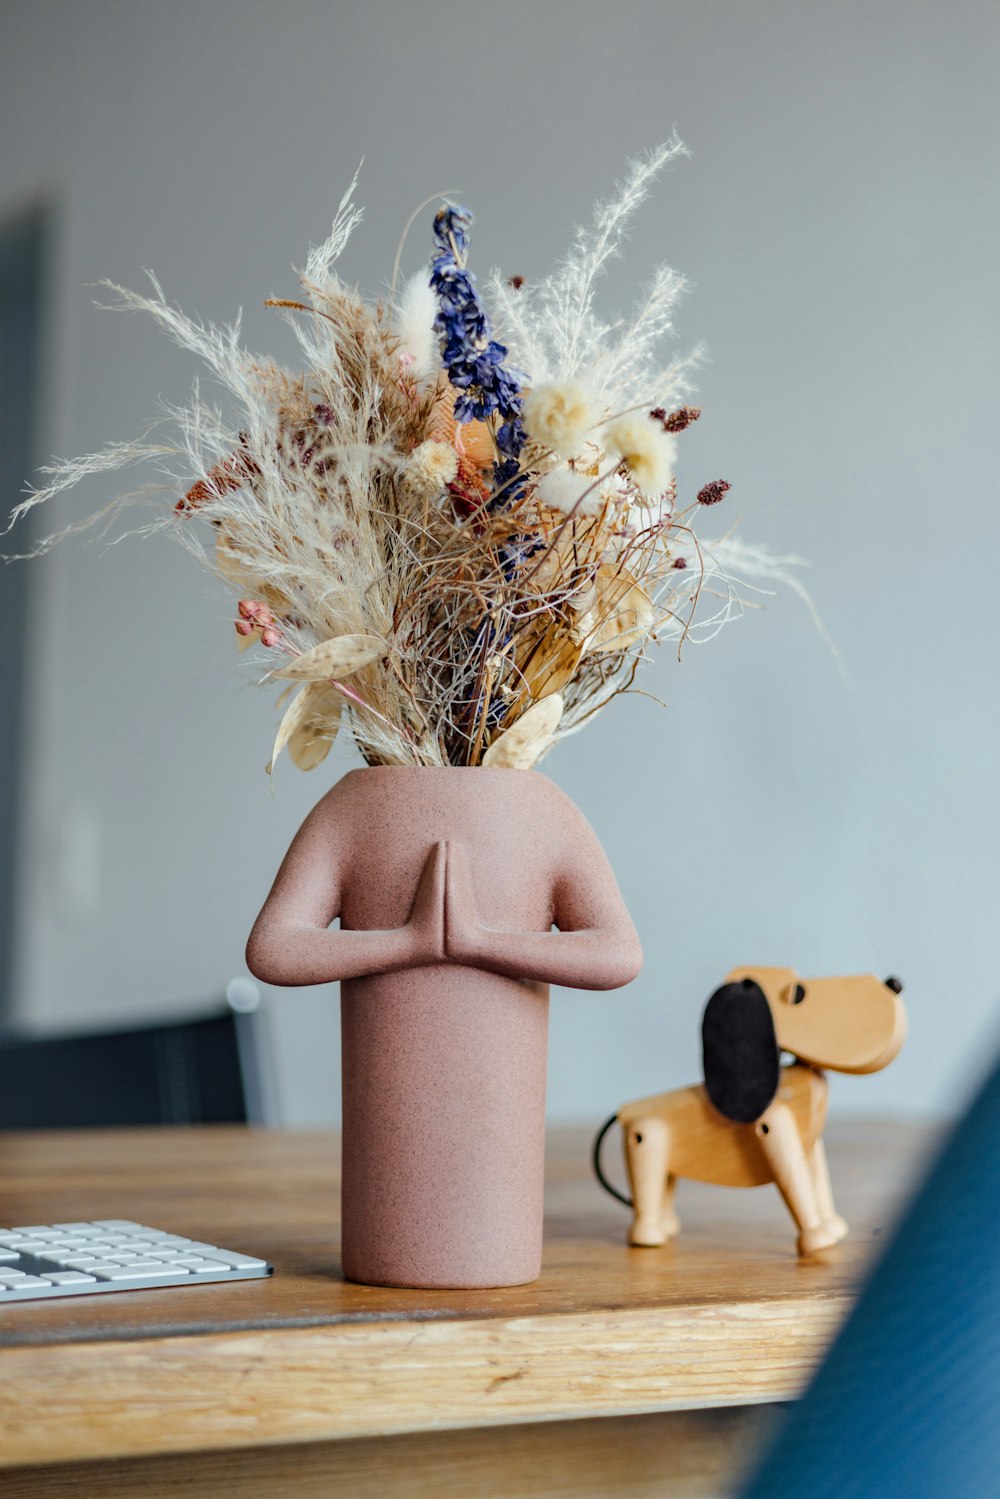 a vase with dried flowers and a dog figurine